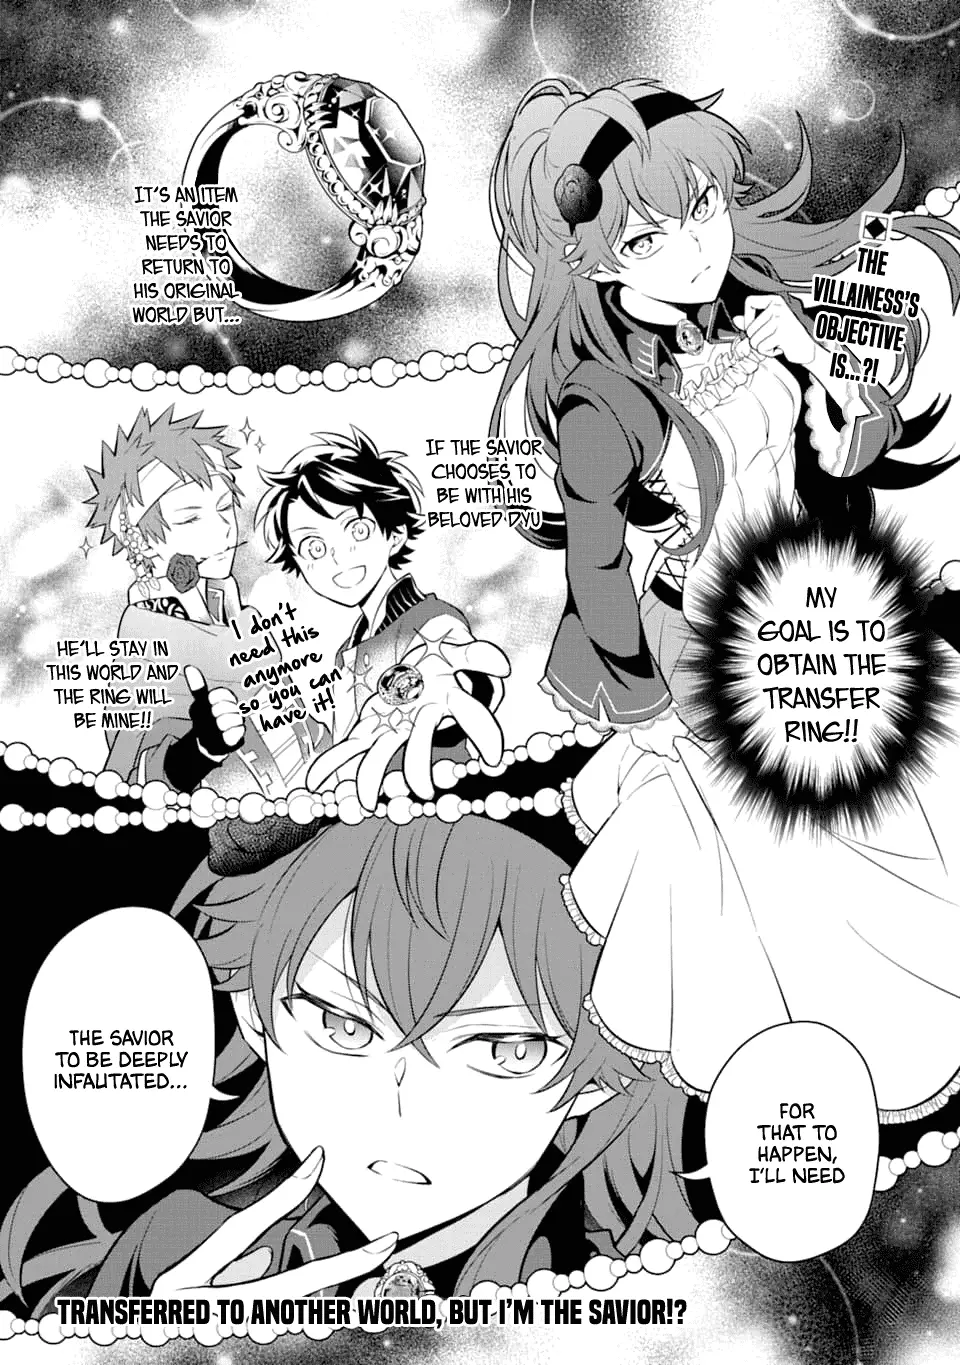 Transferred To Another World, But I'm Saving The World Of An Otome Game!? - 11 page 1